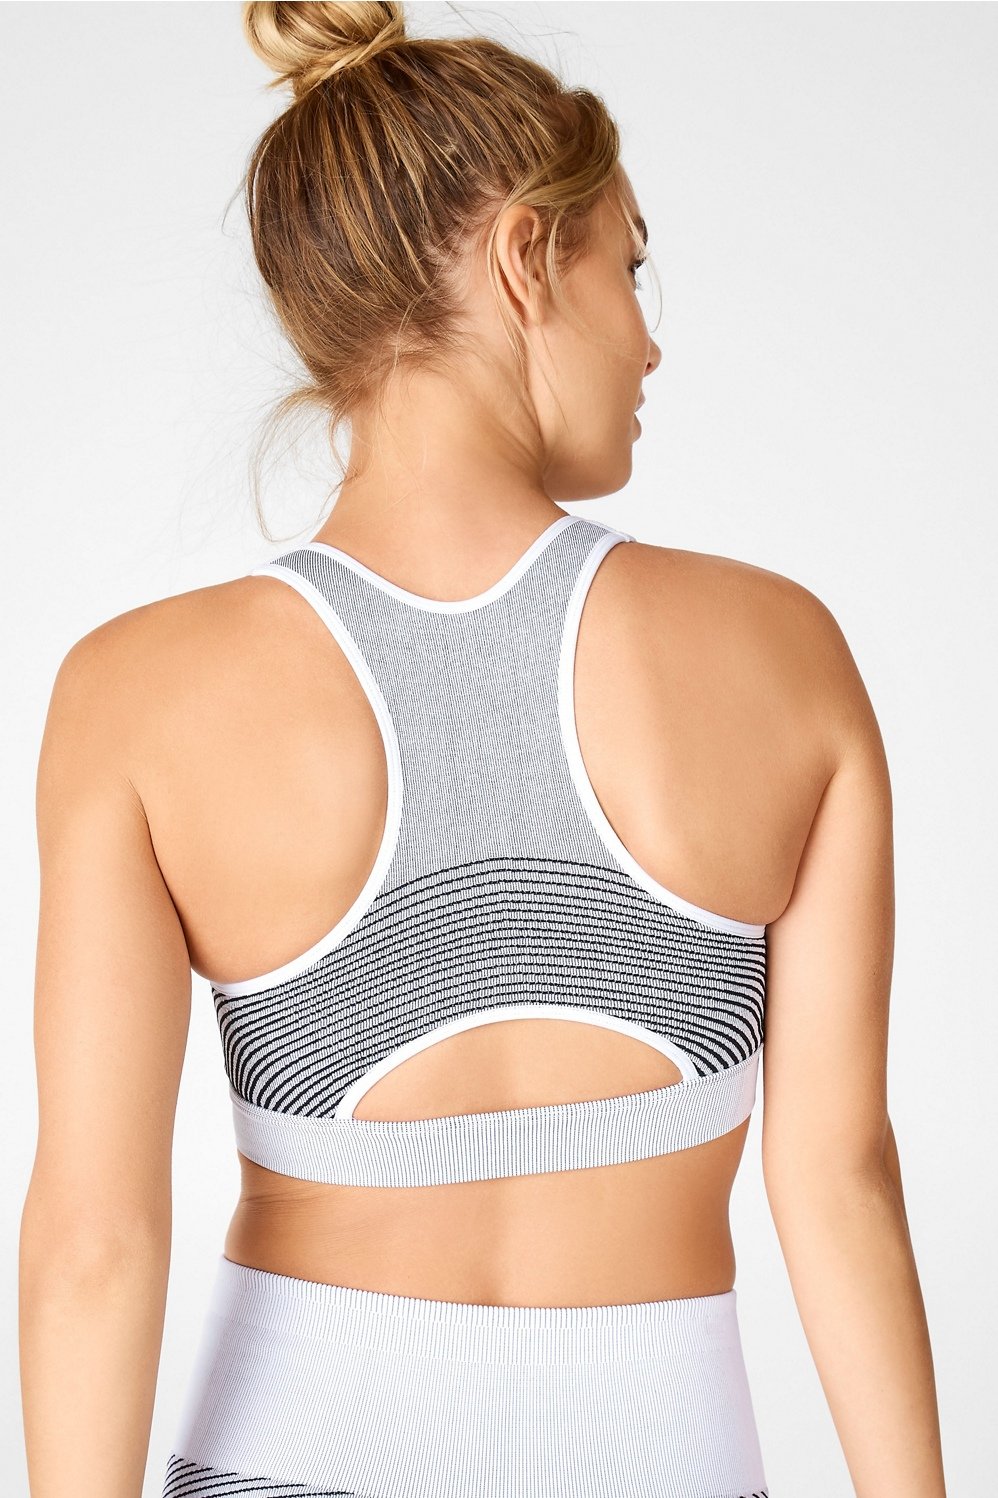 Fabletics Inspire Seamless Panel Sports Bra in Soft Heather Gray Size XL  NWT - $30 New With Tags - From Foxy